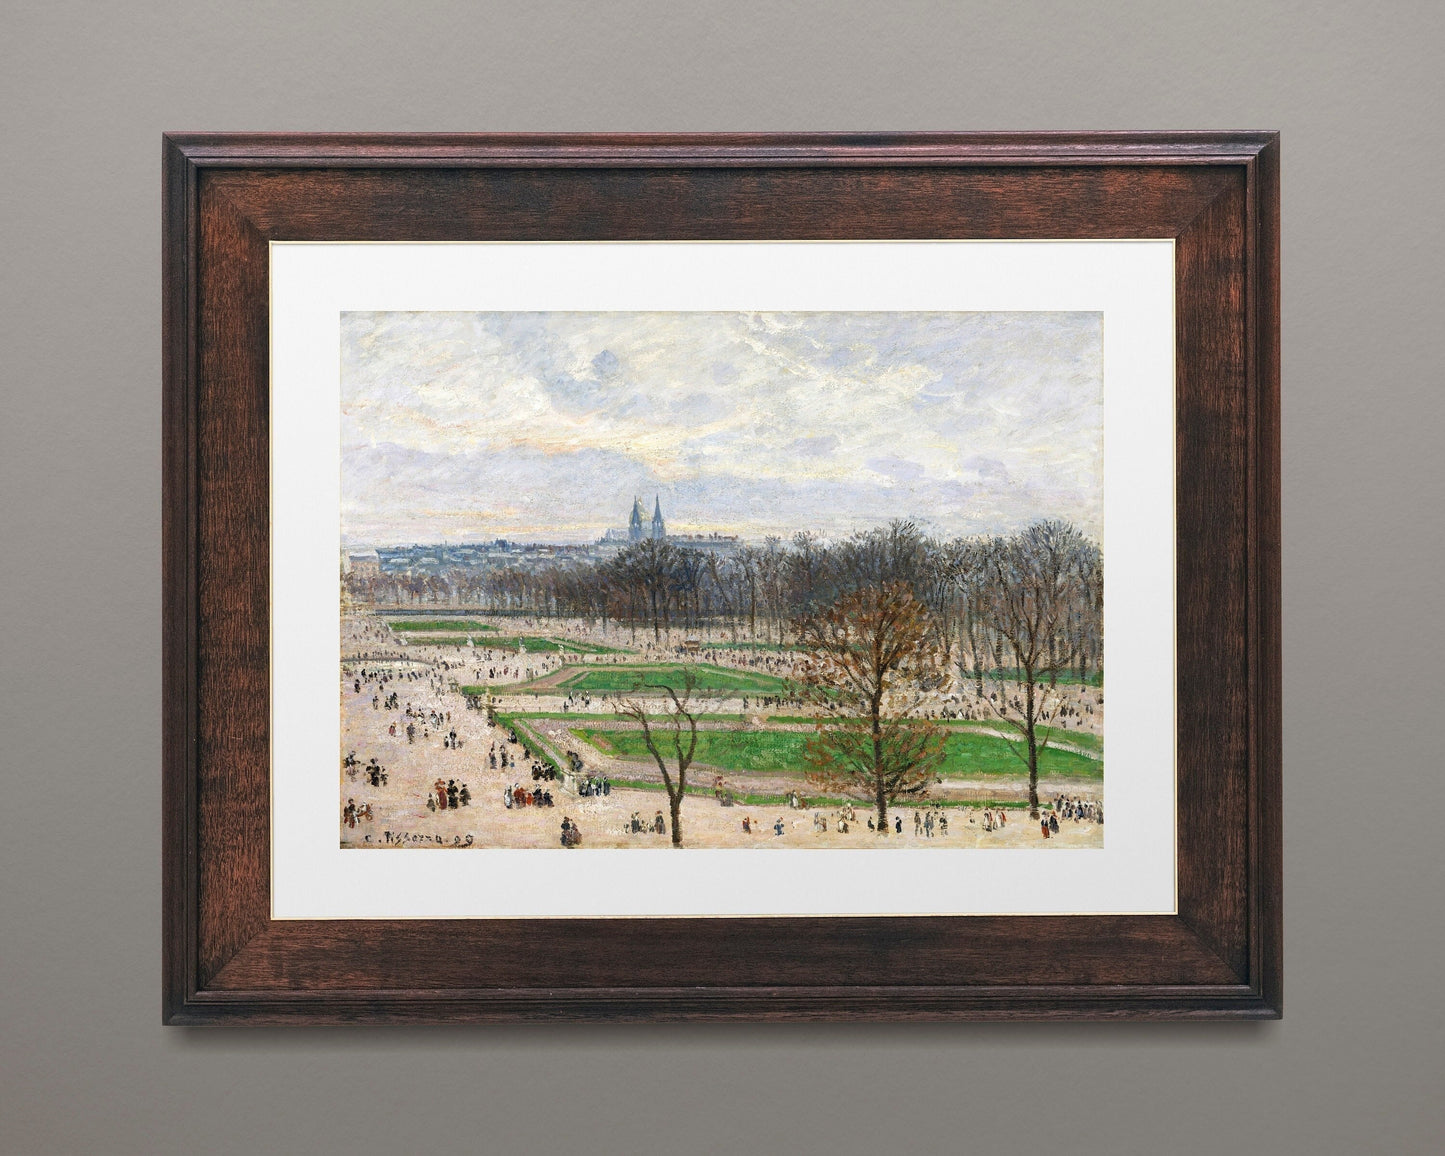 The Garden of the Tuileries on a Winter Afternoon (1899) by Camille Pissarro Poster Print Wall Hanging Decor